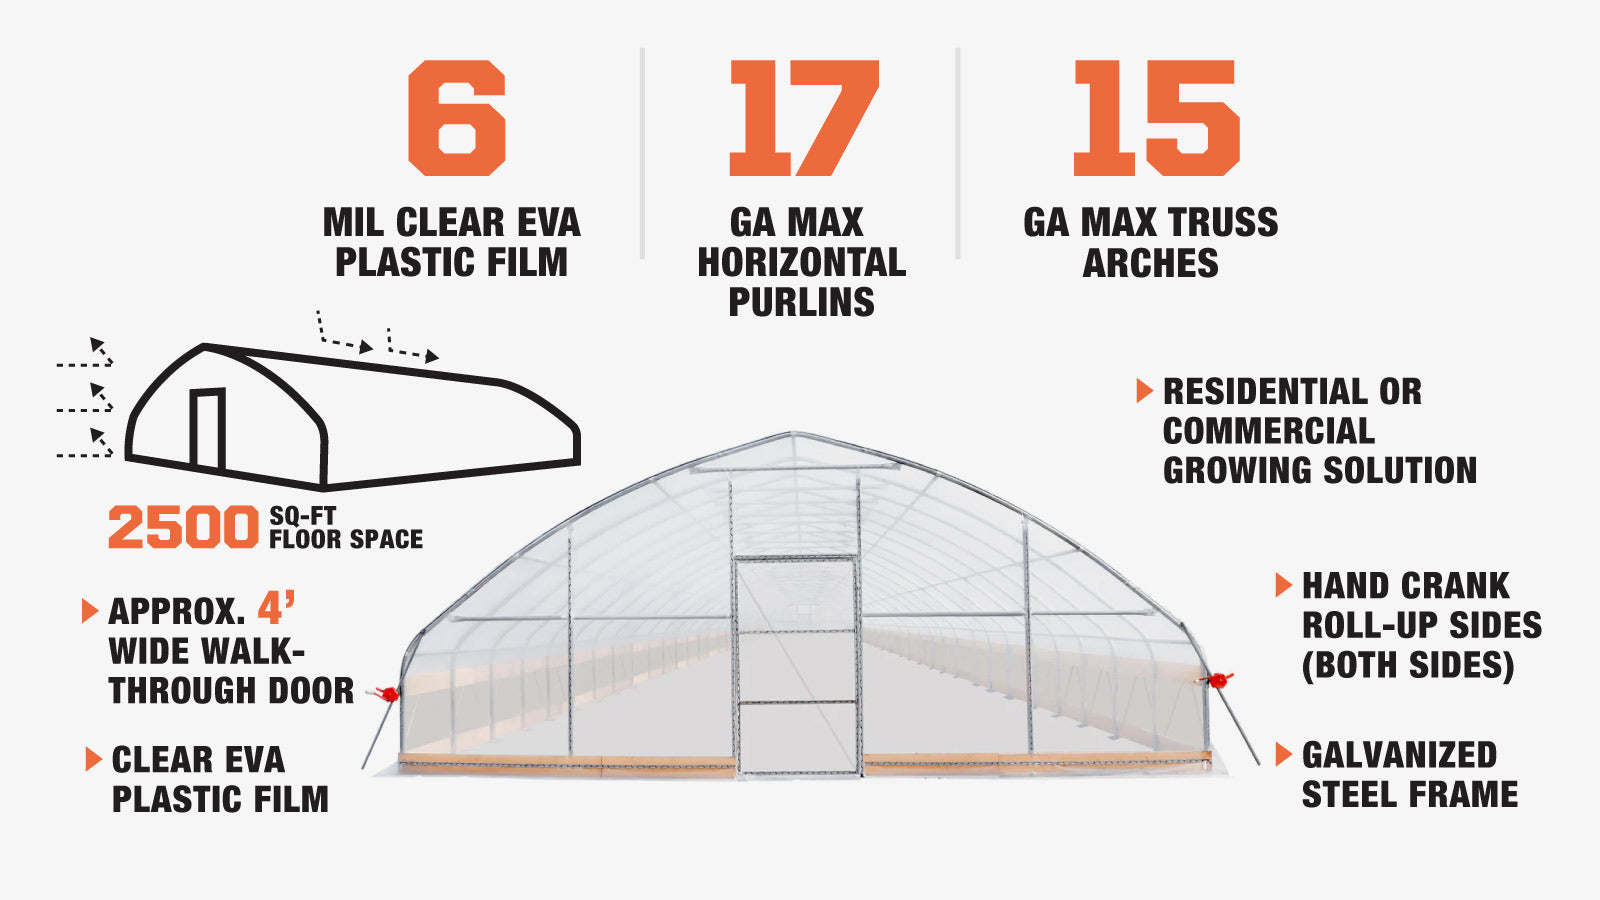 TMG Industrial 25’ x 100’ Tunnel Greenhouse Grow Tent w/6 Mil Clear EVA Plastic Film, Cold Frame, Hand Crank Roll-Up Sides, Peak Ceiling Roof, TMG-GH25100-description-image